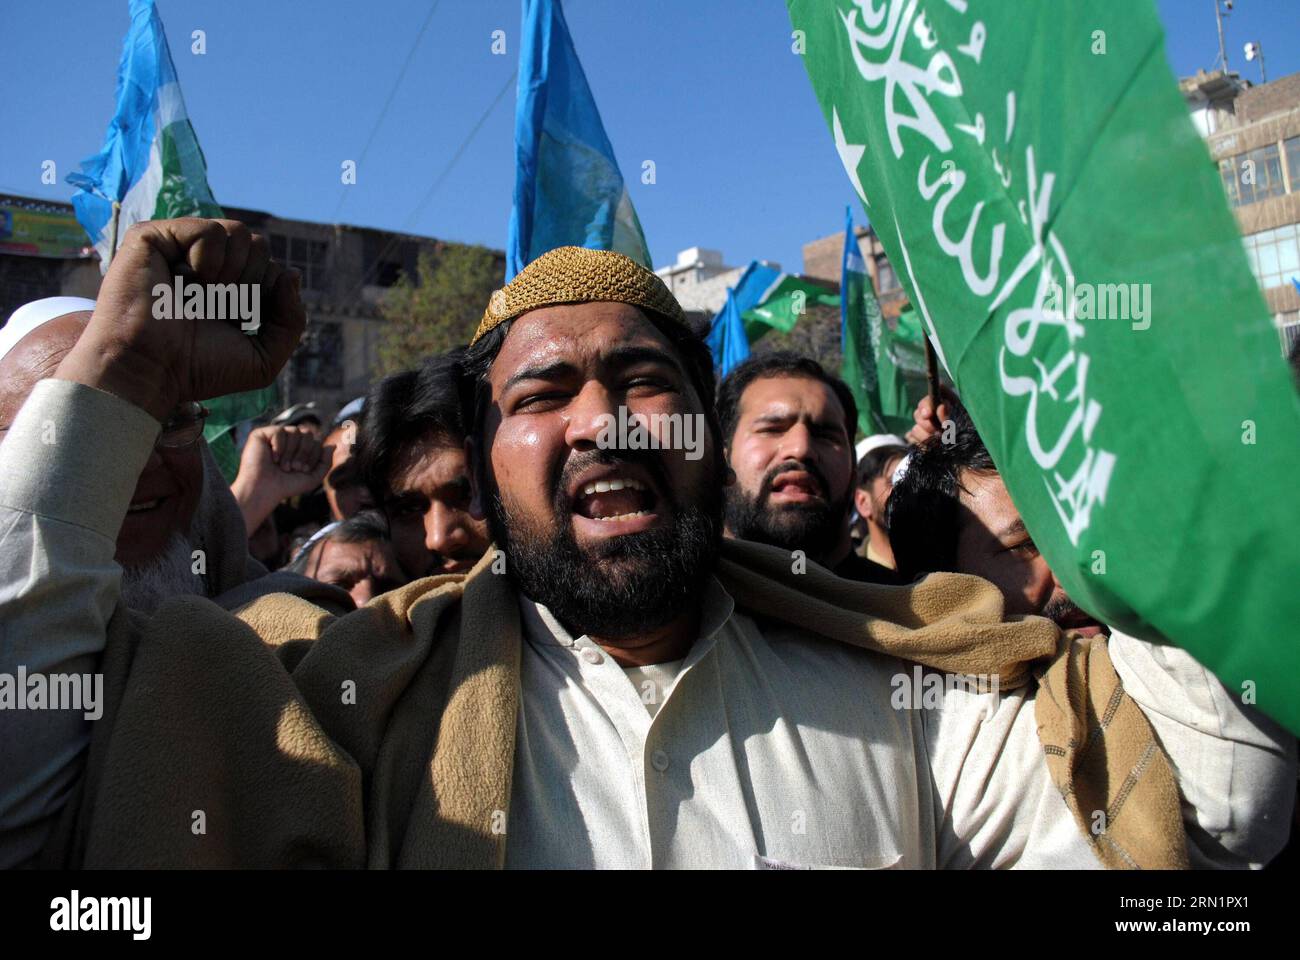 AKTUELLES ZEITGESCHEHEN Demonstration gegen Charlie Hebdo Mohammed Karikaturen in Pakistan (150116) -- PESHAWAR, Jan. 16, 2015 -- Pakistani people shout slogans against the printing of satirical sketches of the Prophet Muhammad by French magazine Charlie Hebdo during a protest in northwest Pakistan s Peshawar, Jan. 16, 2015. Religious parties across Pakistan are protesting against blasphemous caricatures published by French weekly magazine Charlie Hebdo. ) PAKISTAN-PESHAWAR-PROTEST-CHARLIE HEBDO UmarxQayyum PUBLICATIONxNOTxINxCHN   News Current events Demonstration against Charlie Hebdo Mohamm Stock Photo